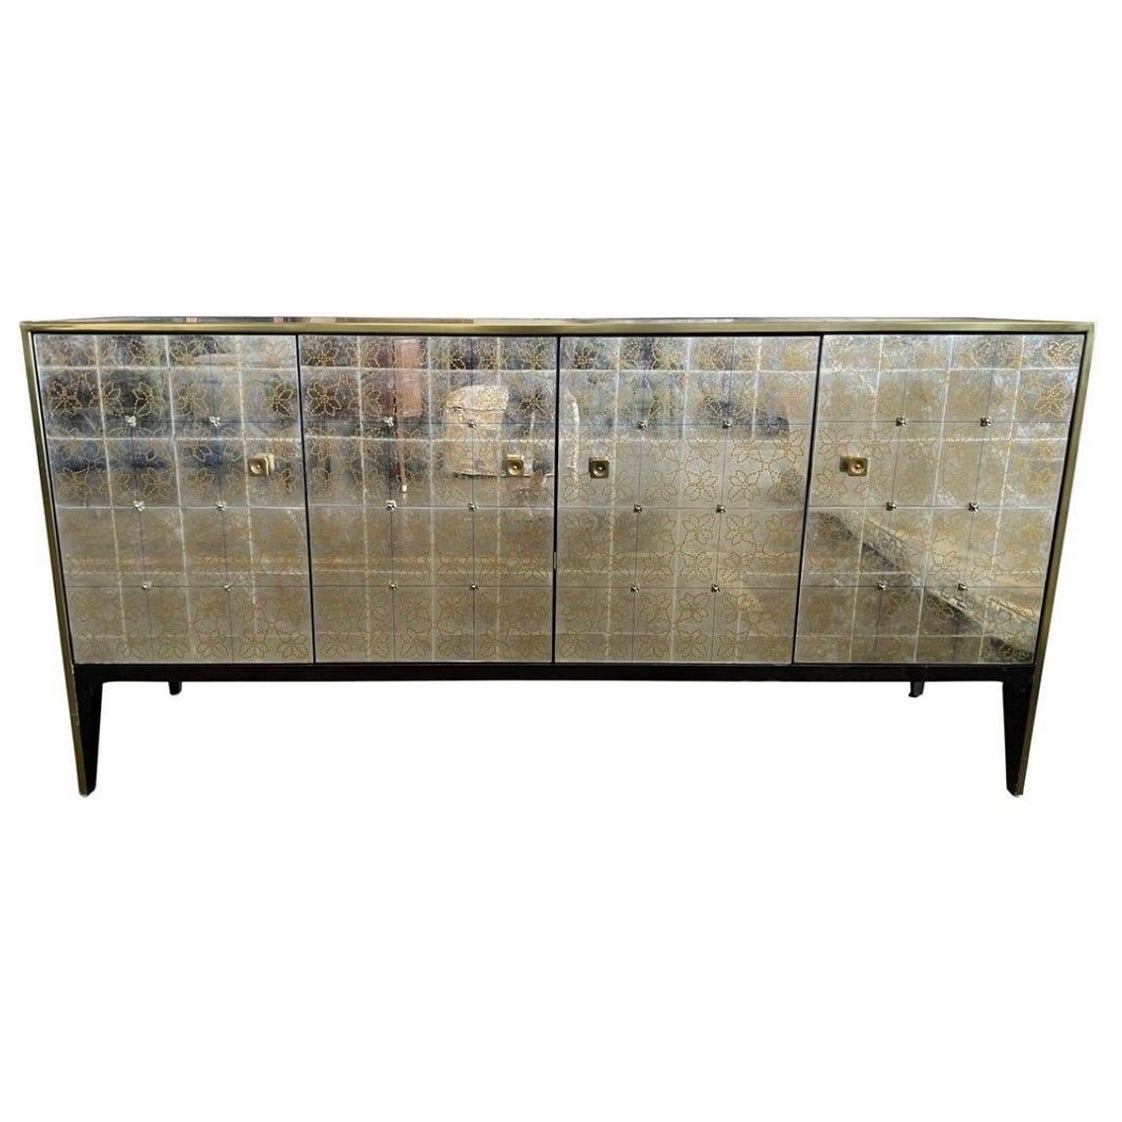 Silver Eglomise Mirrored Credenza Sideboard Entertainment Cabinet